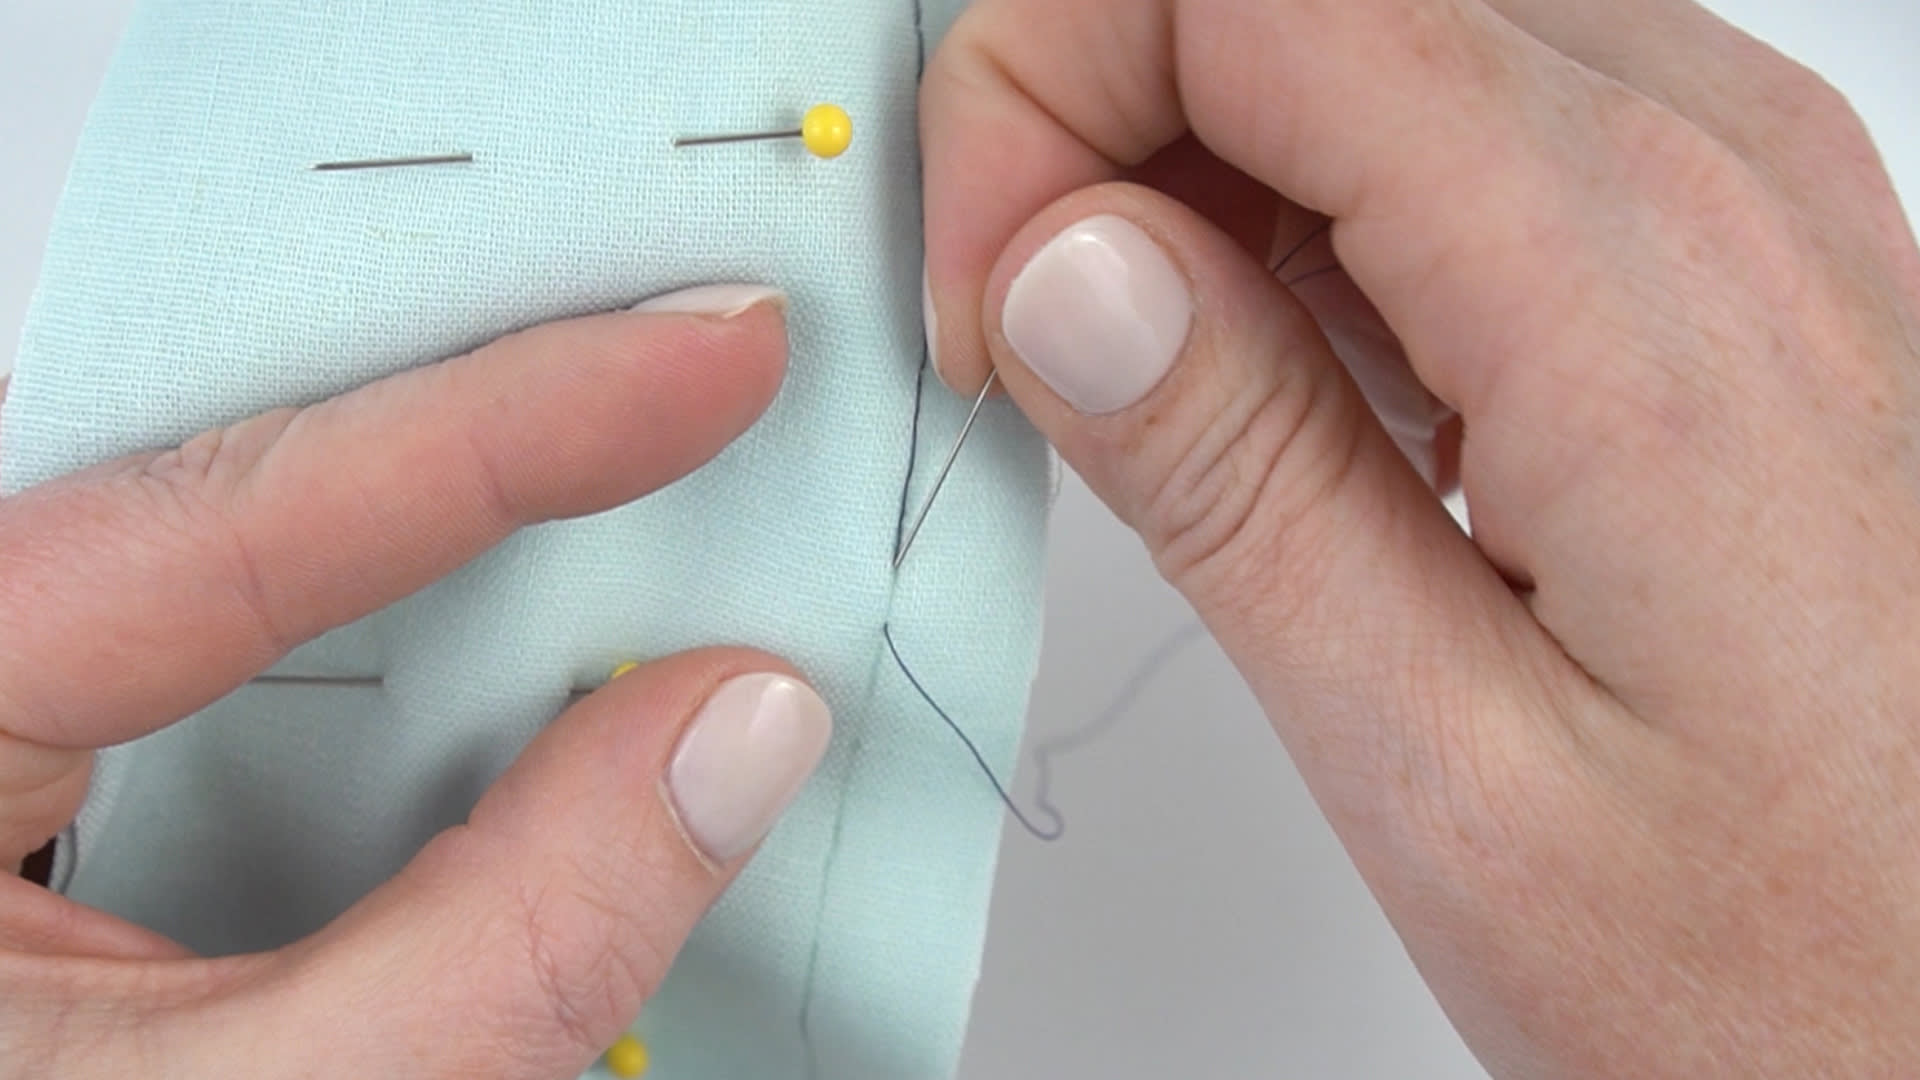 How To Do An Invisible Stitch (Ladder Stitch) by Hand